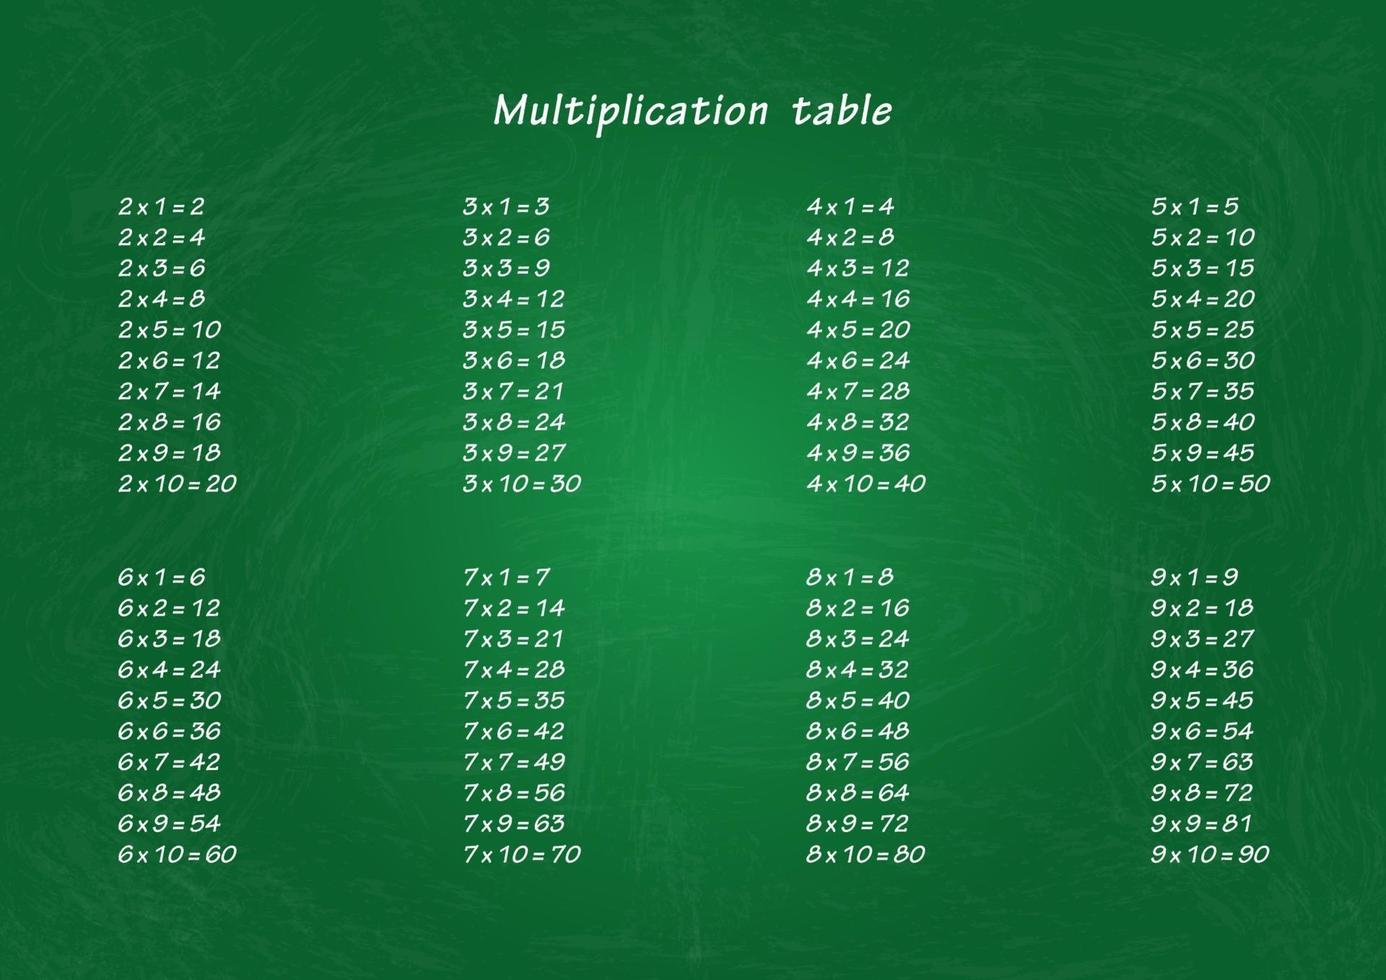 Multiplication table on the green school board. Illustration material for print. vector